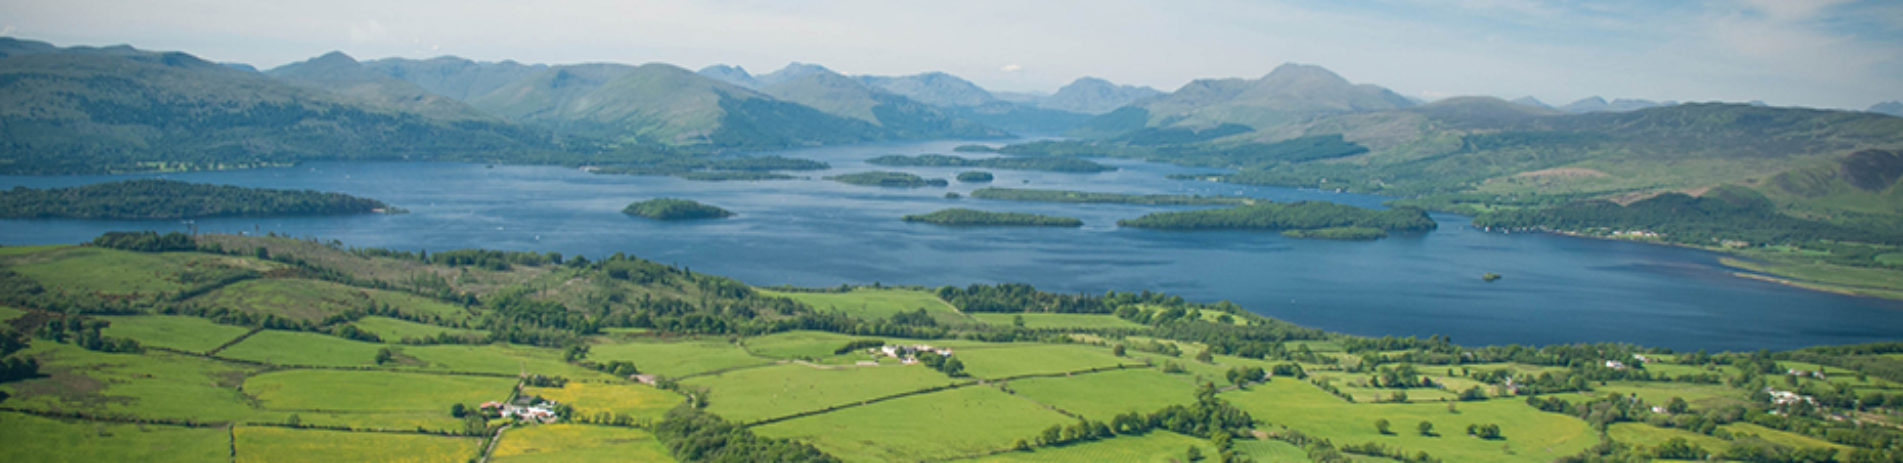 Aerial panorama view of Loch Lomond looking noirth